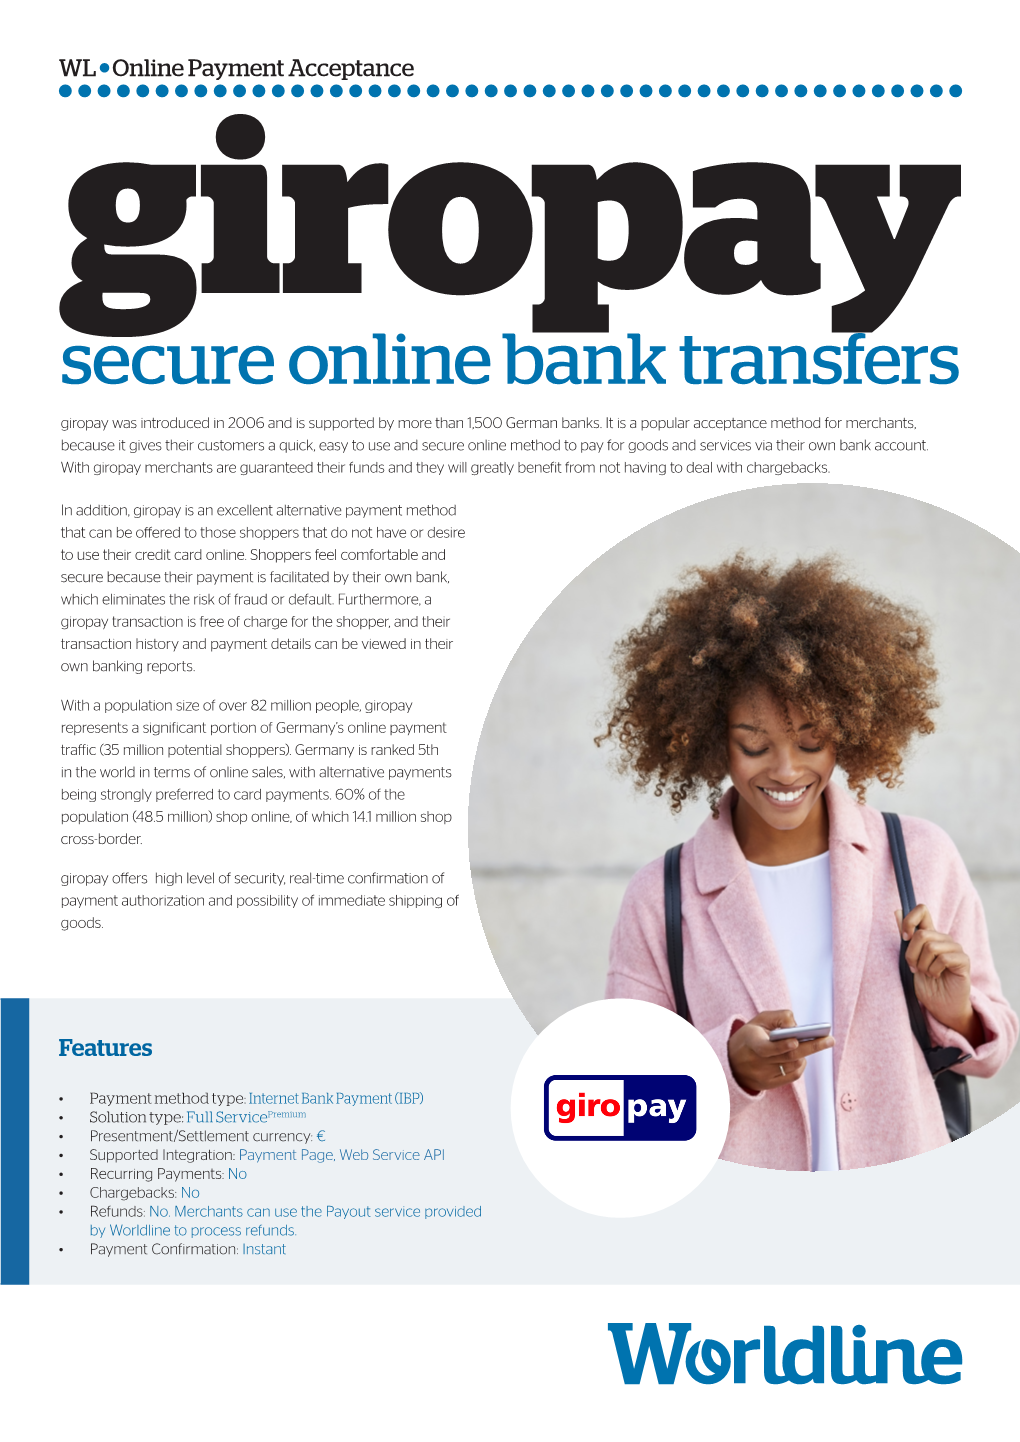 Secure Online Bank Transfers Giropay Was Introduced in 2006 and Is Supported by More Than 1,500 German Banks